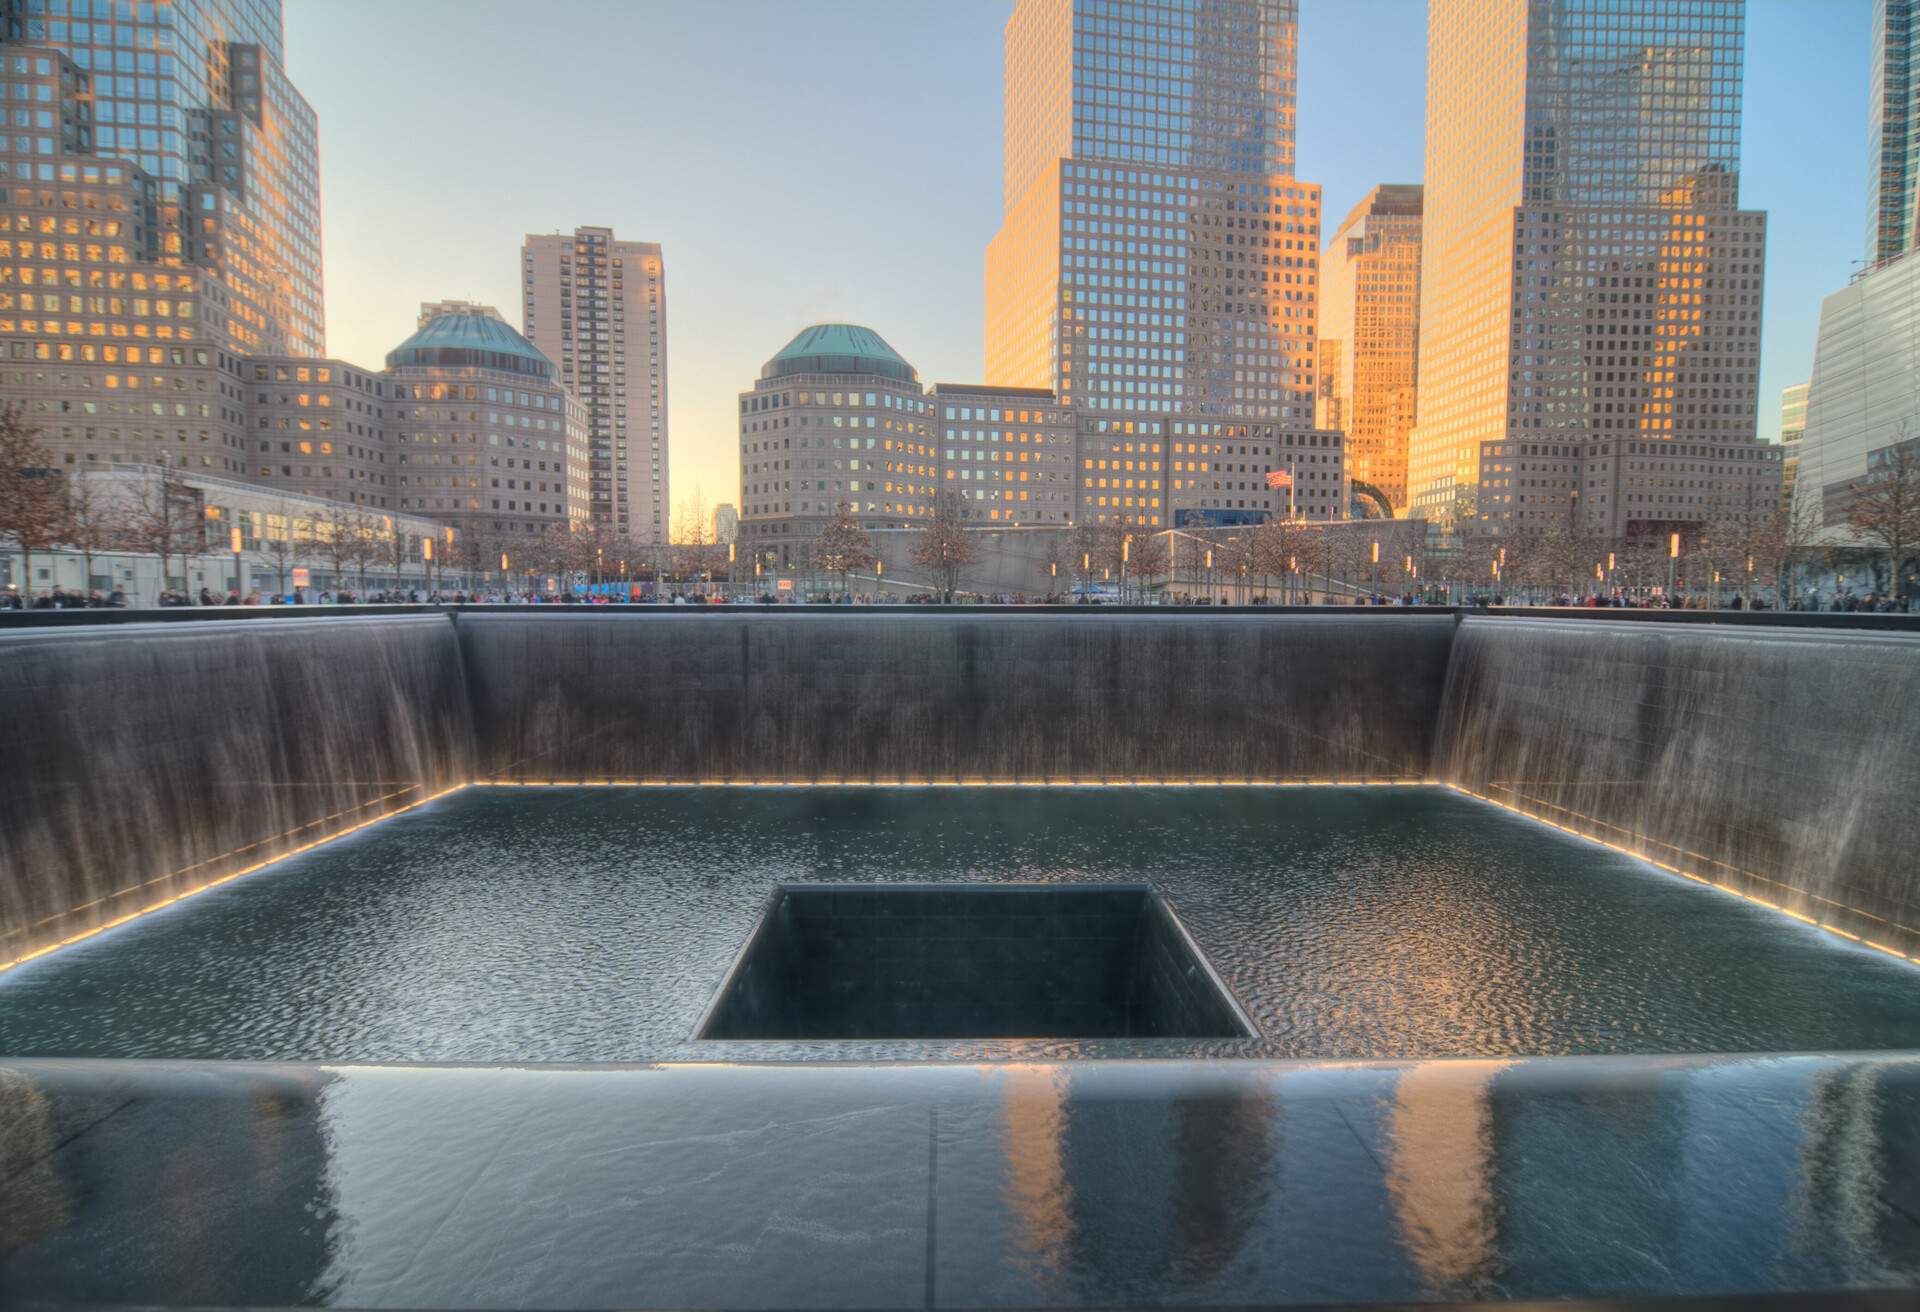 The solemn 9/11 Memorial at the World Trade Centre's Ground Zero in NYC encompasses the vast void, symbolising the immense loss and devastation.